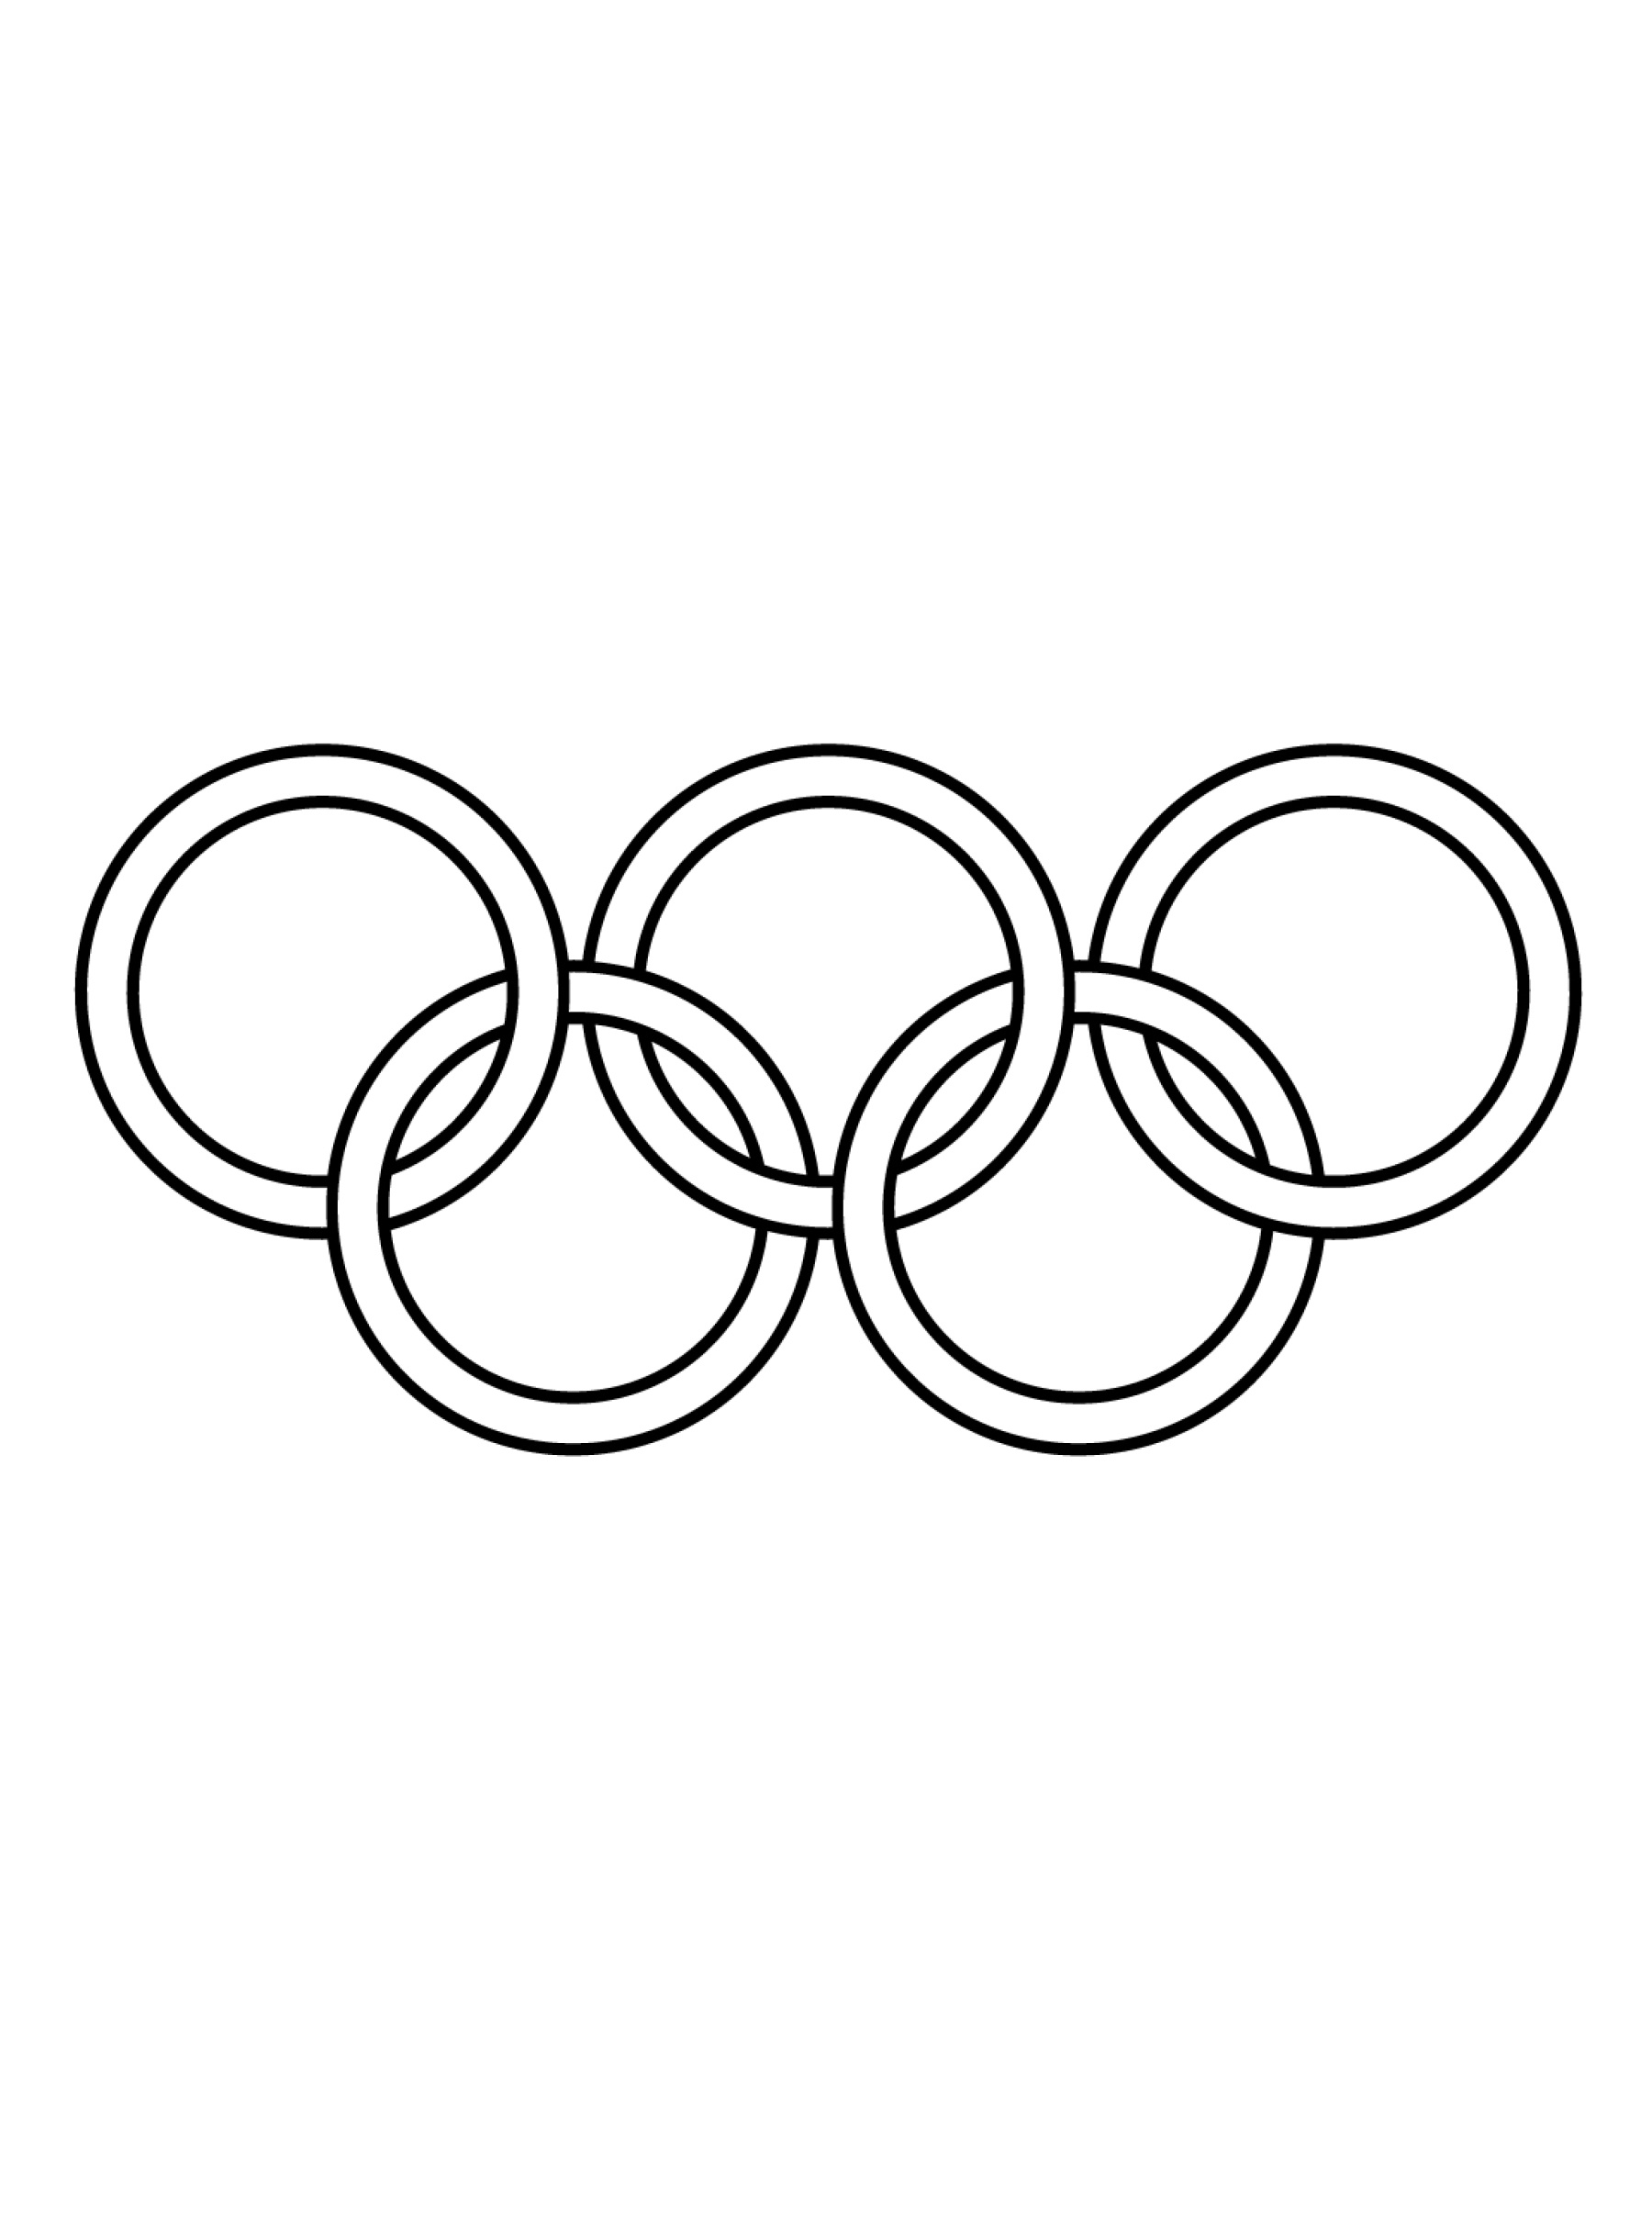 Olympic Games Clipart Black And White